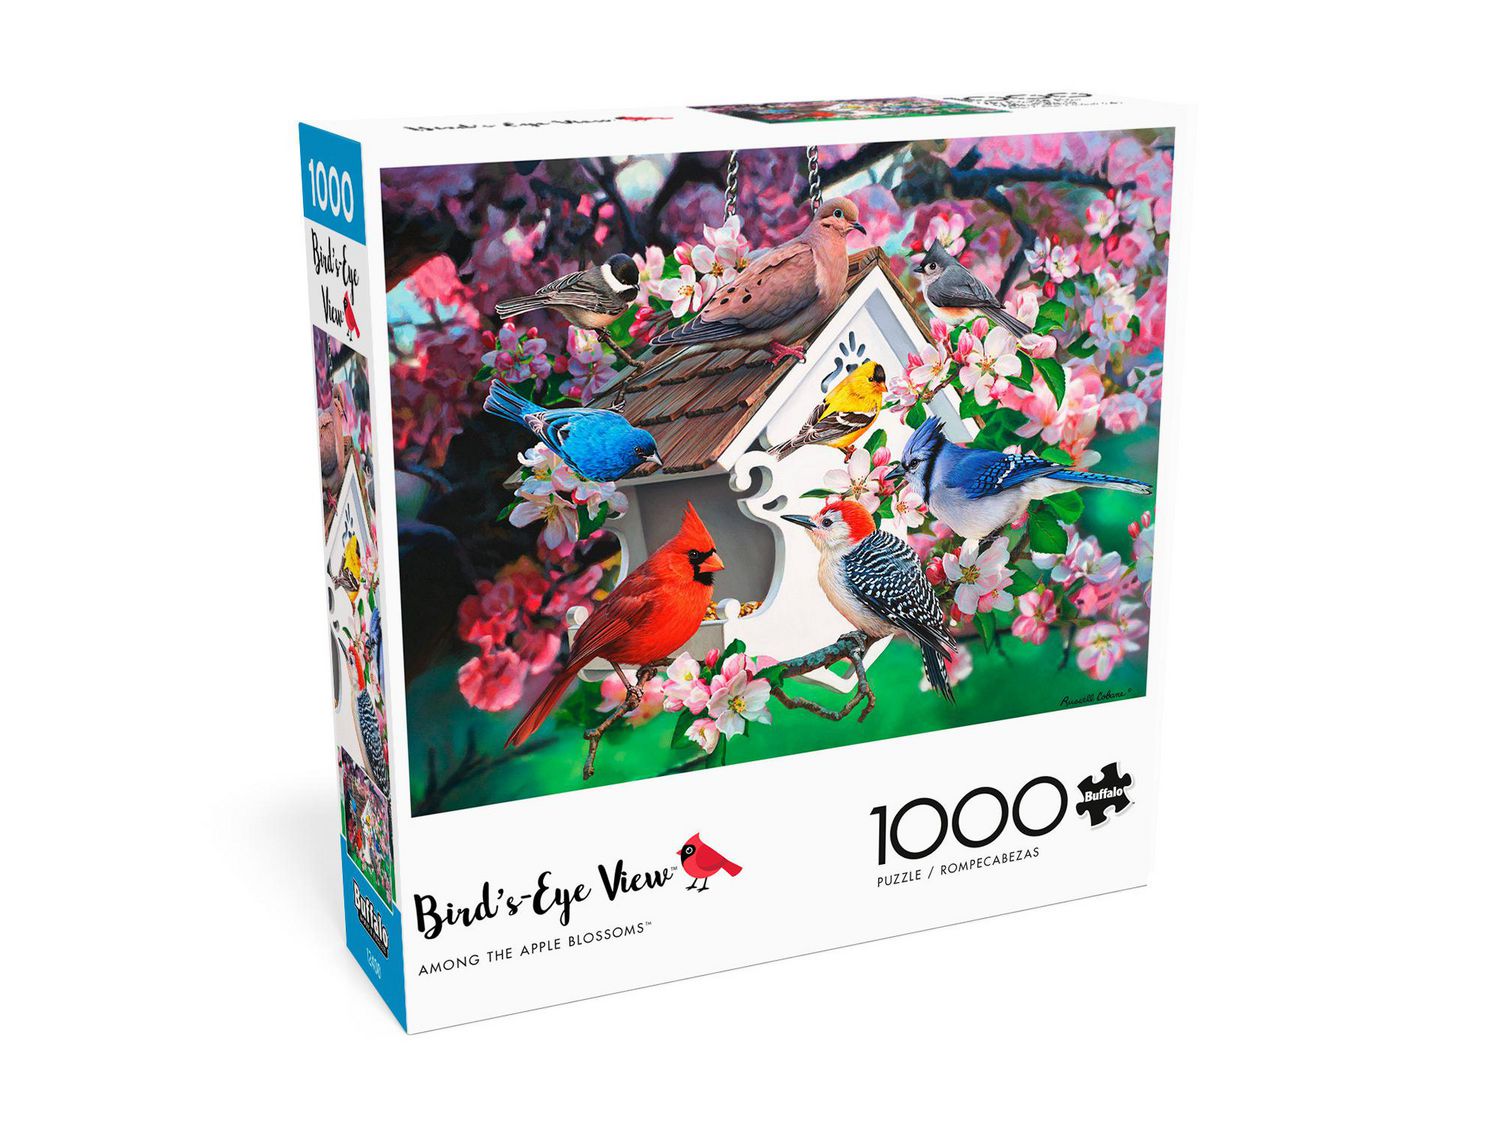 1000 Piece Puzzle Among The Apple Blossoms Jigsaw Bird's Eye View NEW 